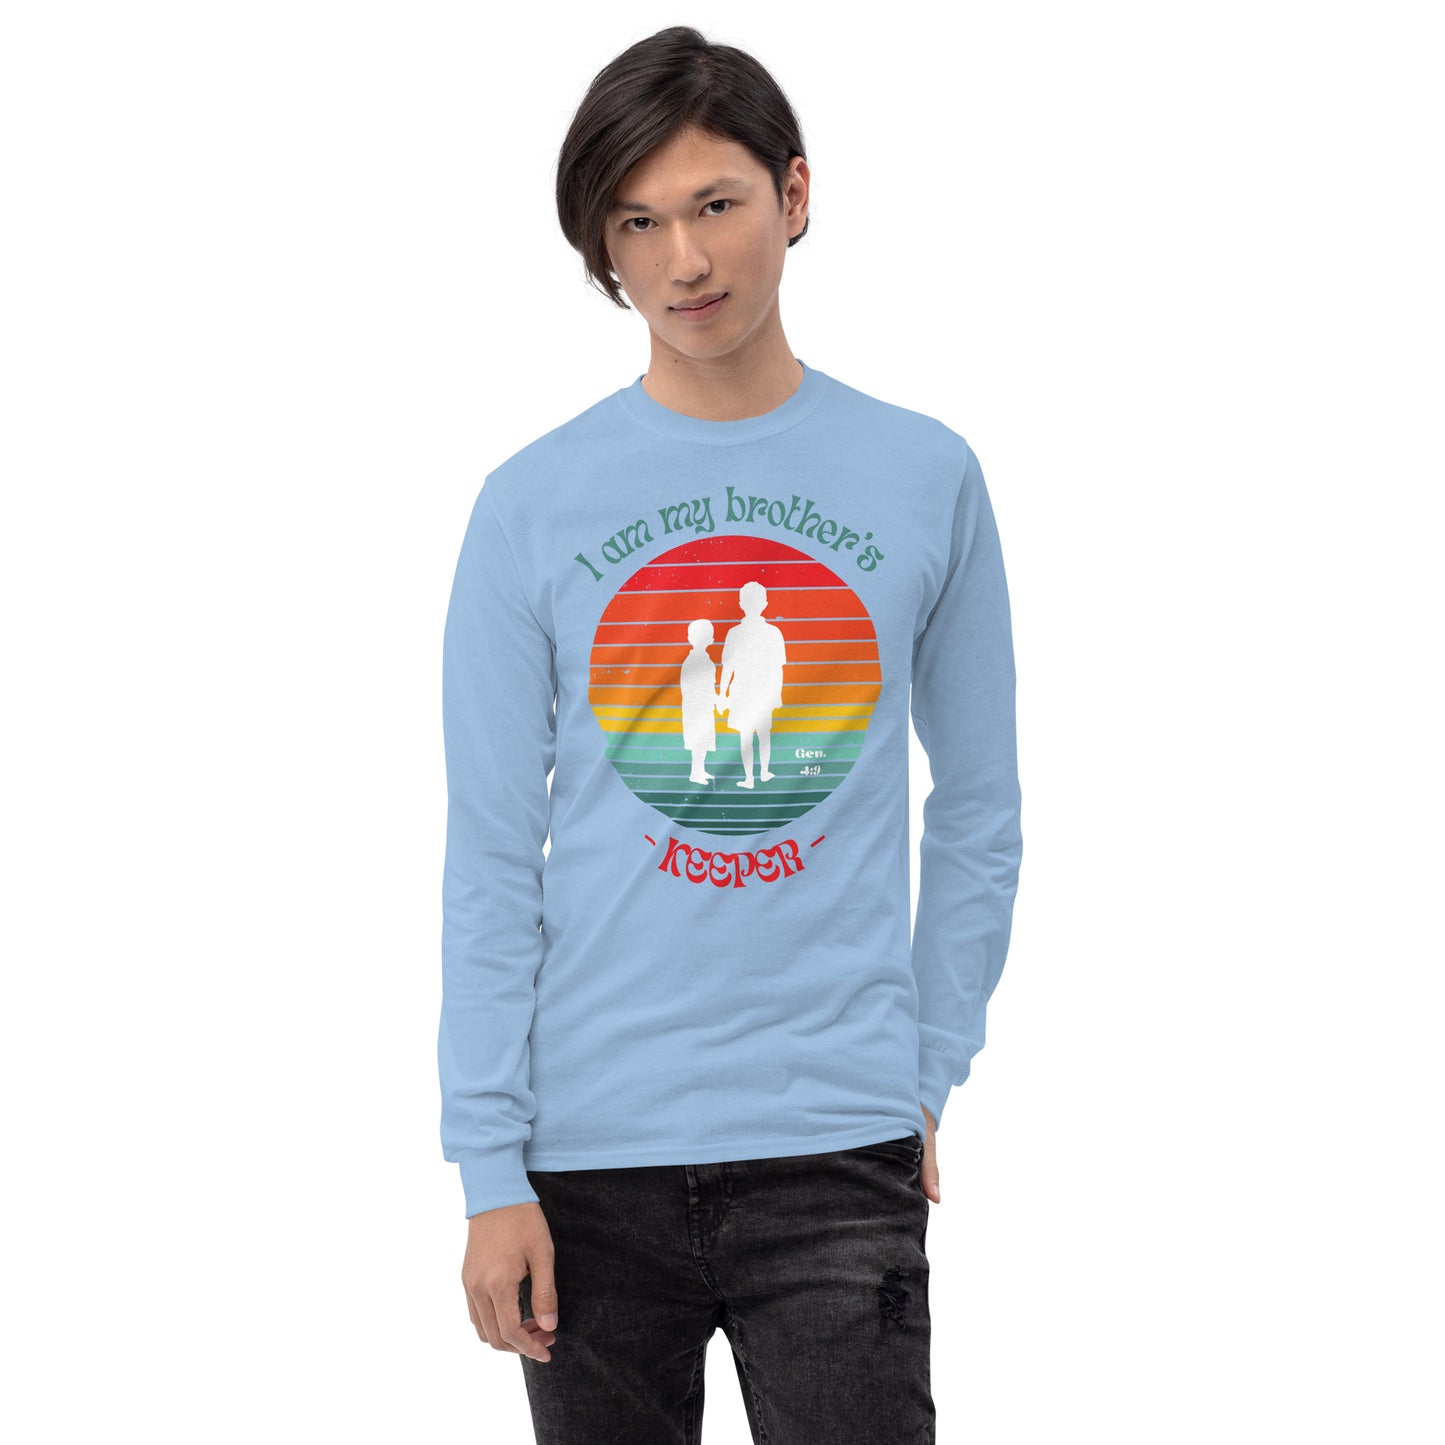 Brother's Keeper Long Sleeve Shirt (male white logo)